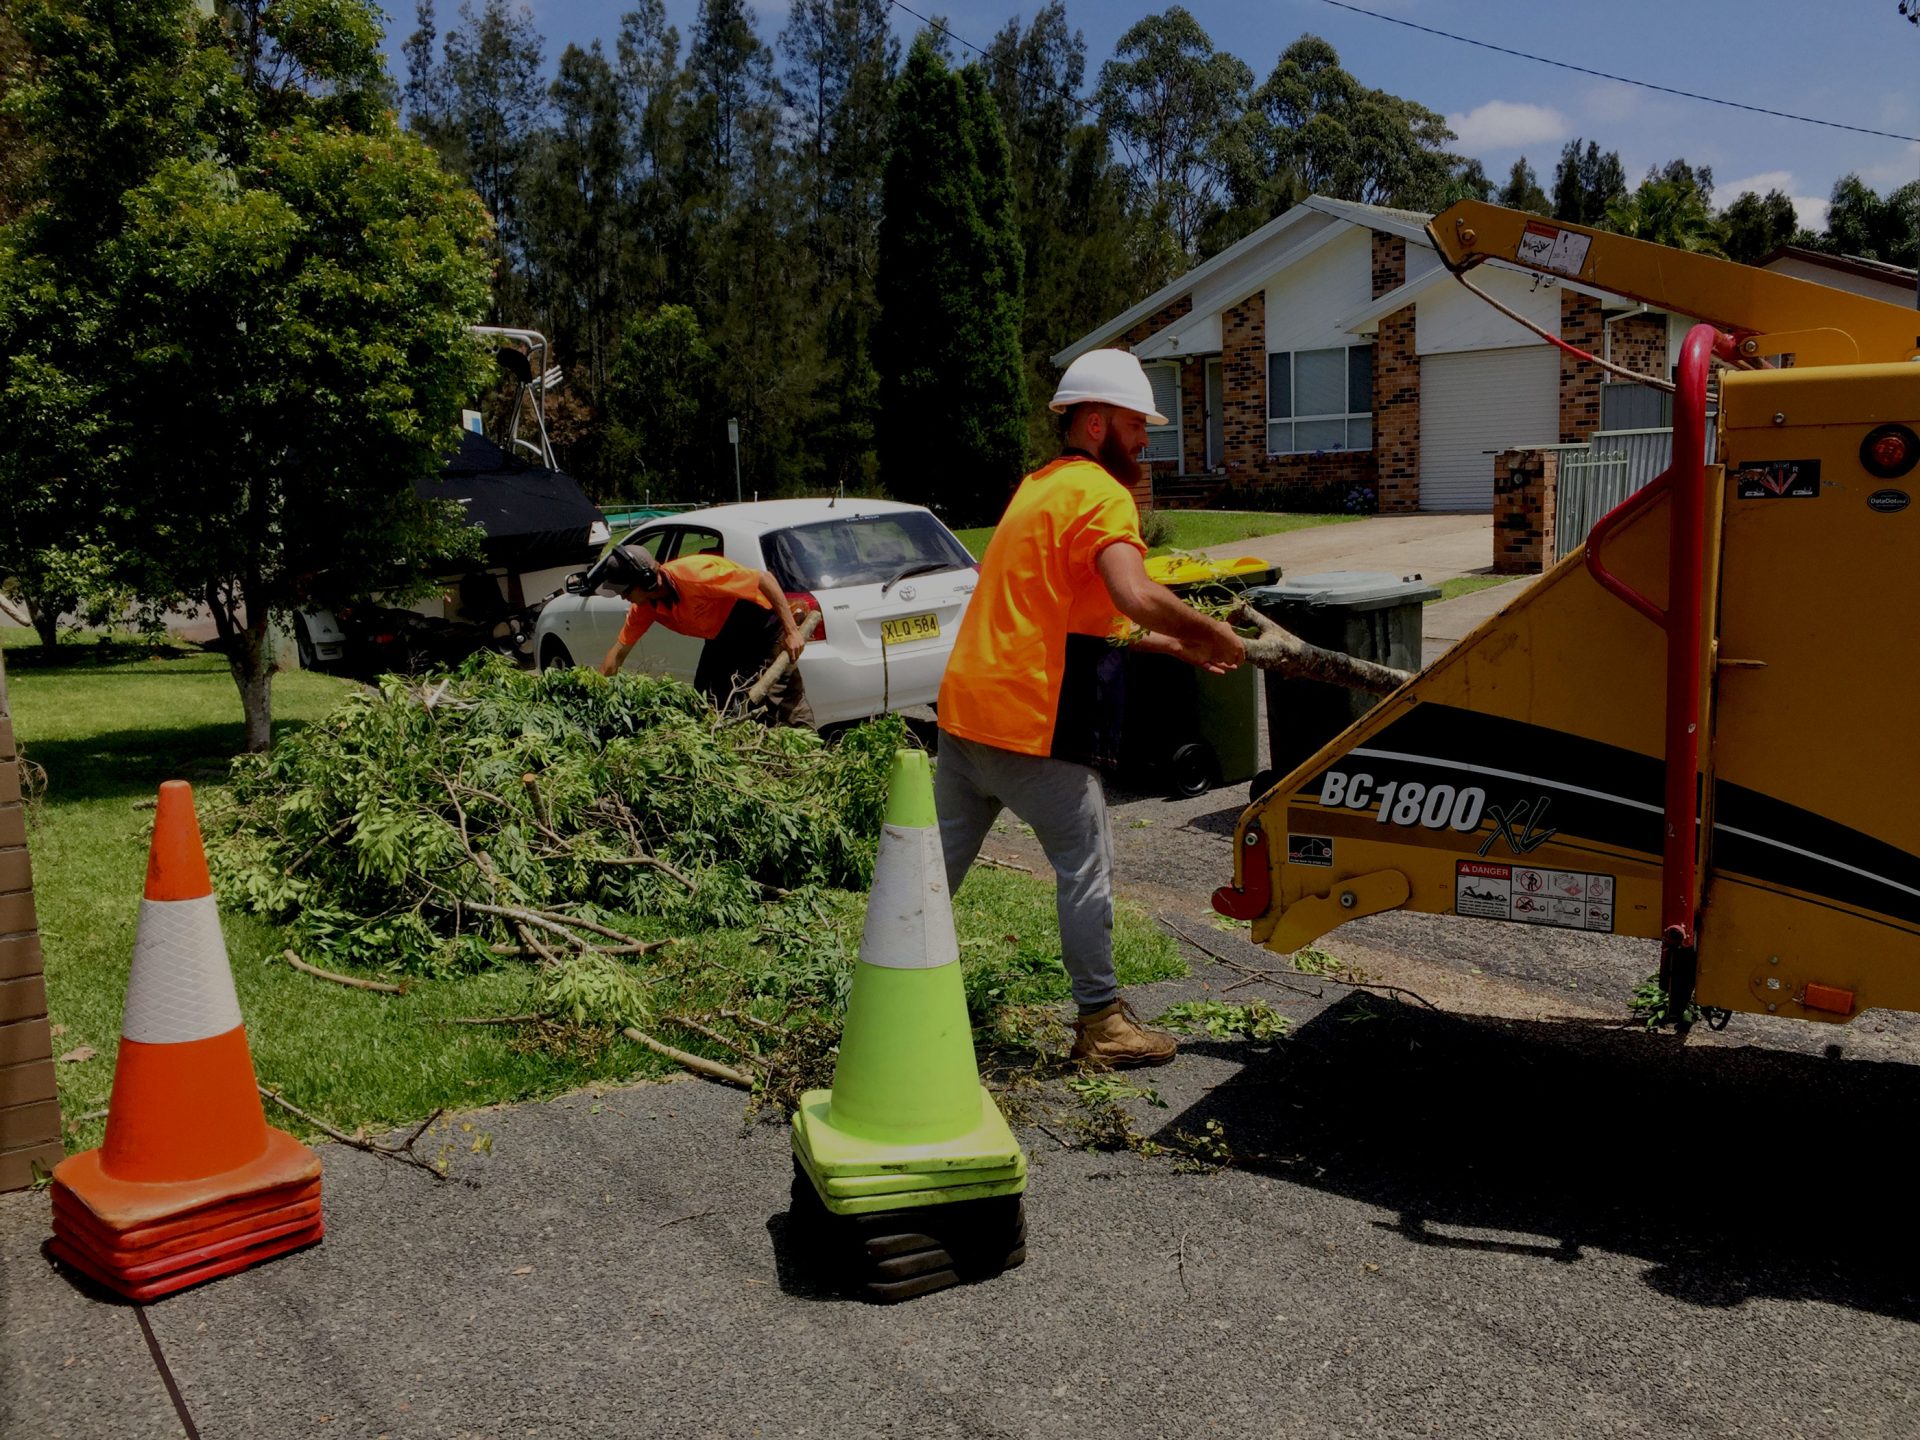 The Full Range of Tree Lopping, Tree Services, Tree Cutting, Stump Removal, and Tree Trimming, Newcastle, Lake Macquarie, Lower Hunter